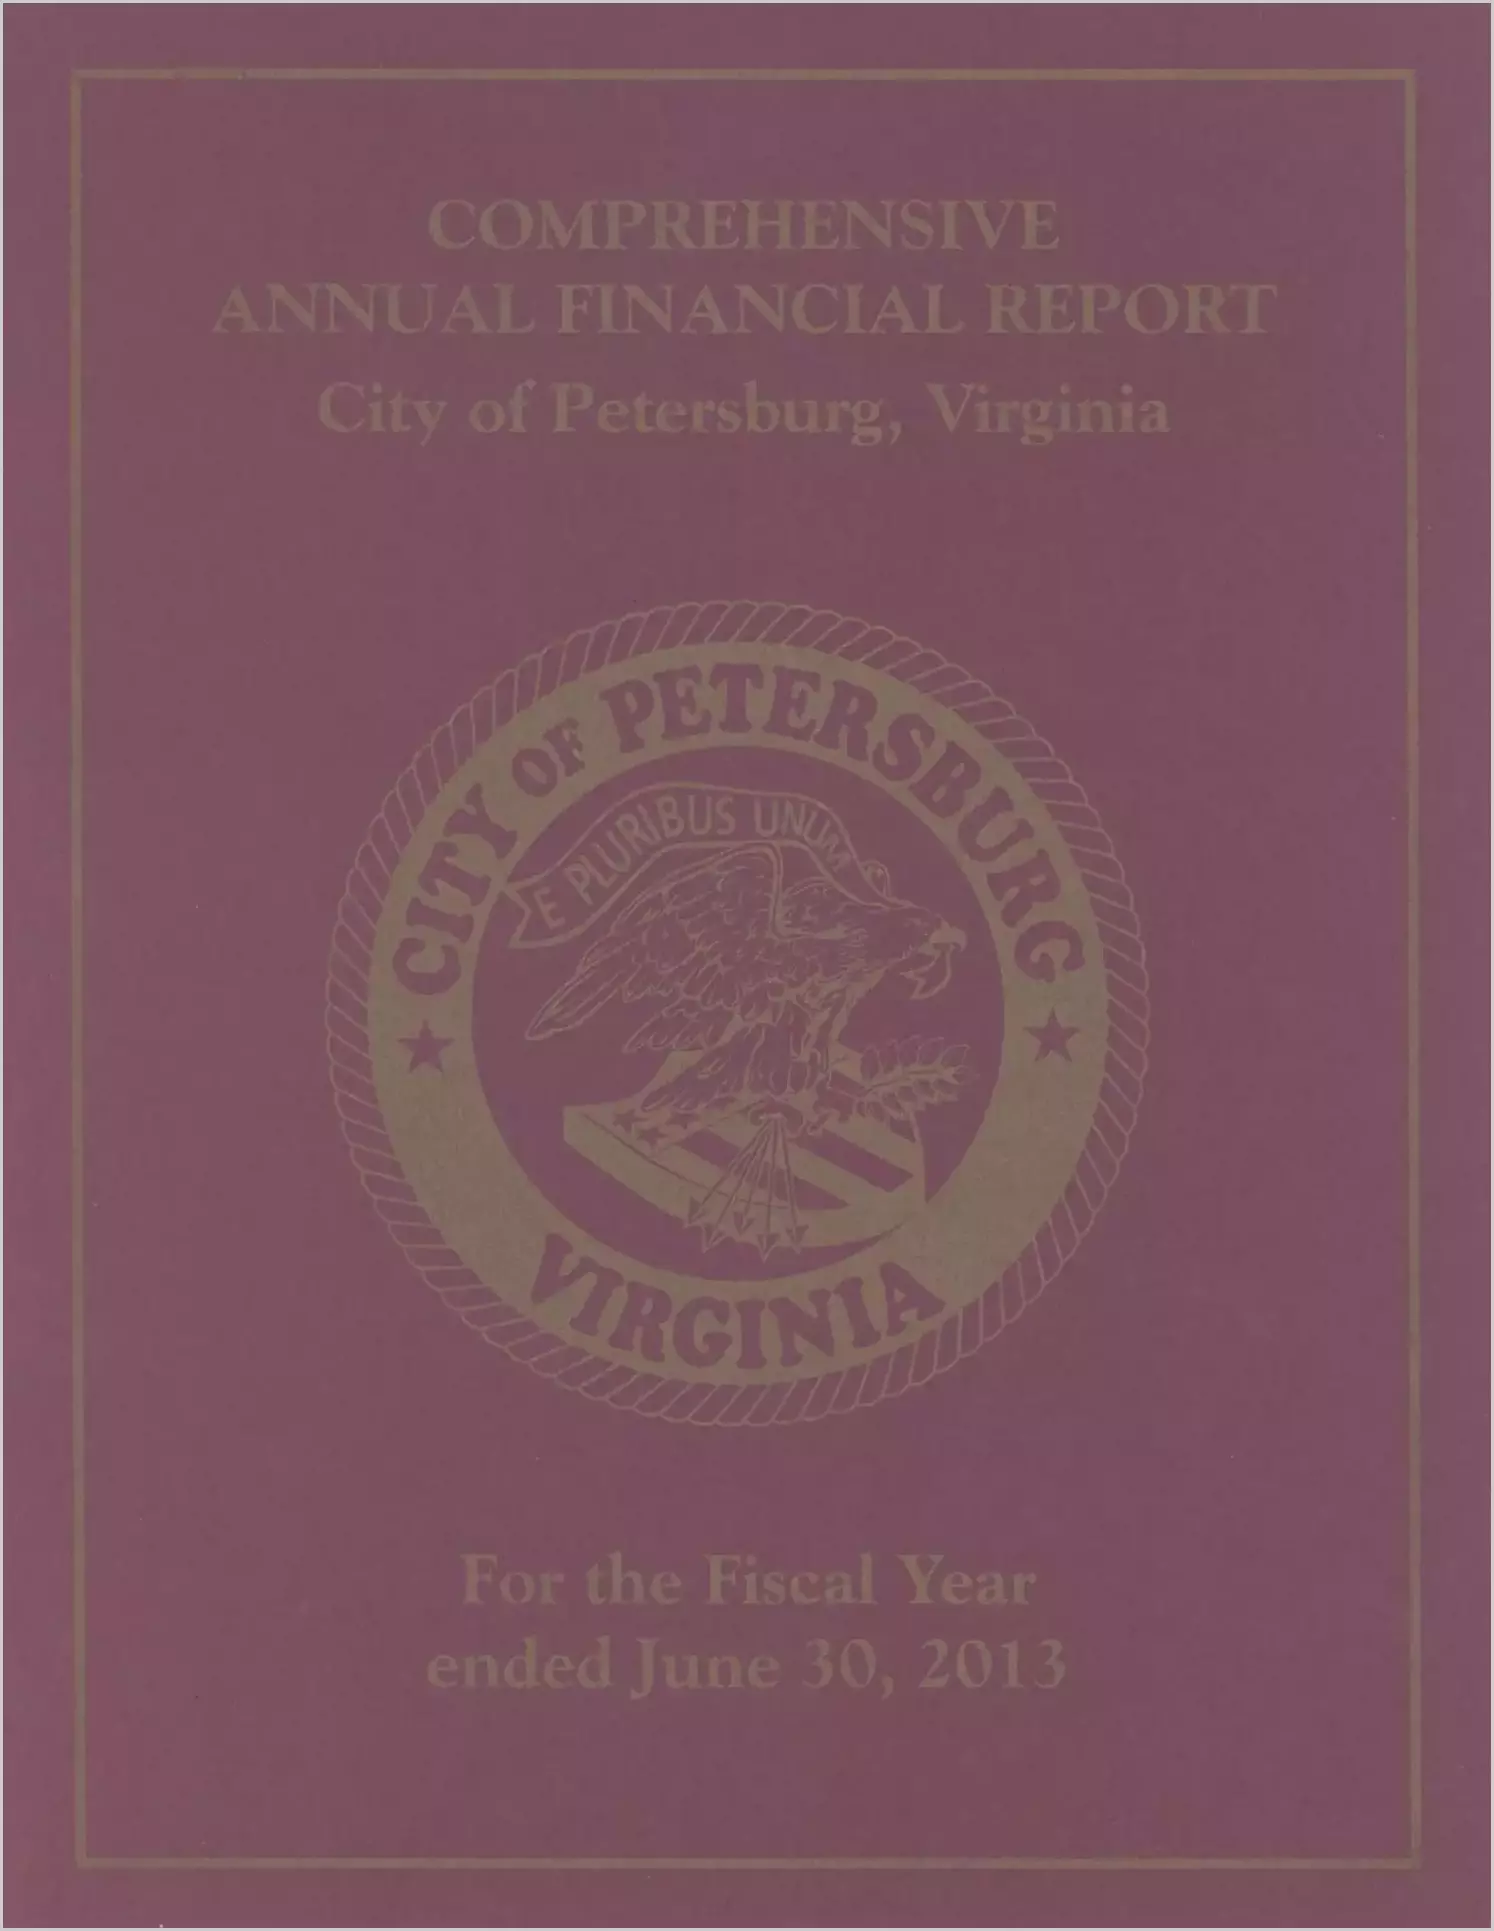 2013 Annual Financial Report for City of Petersburg